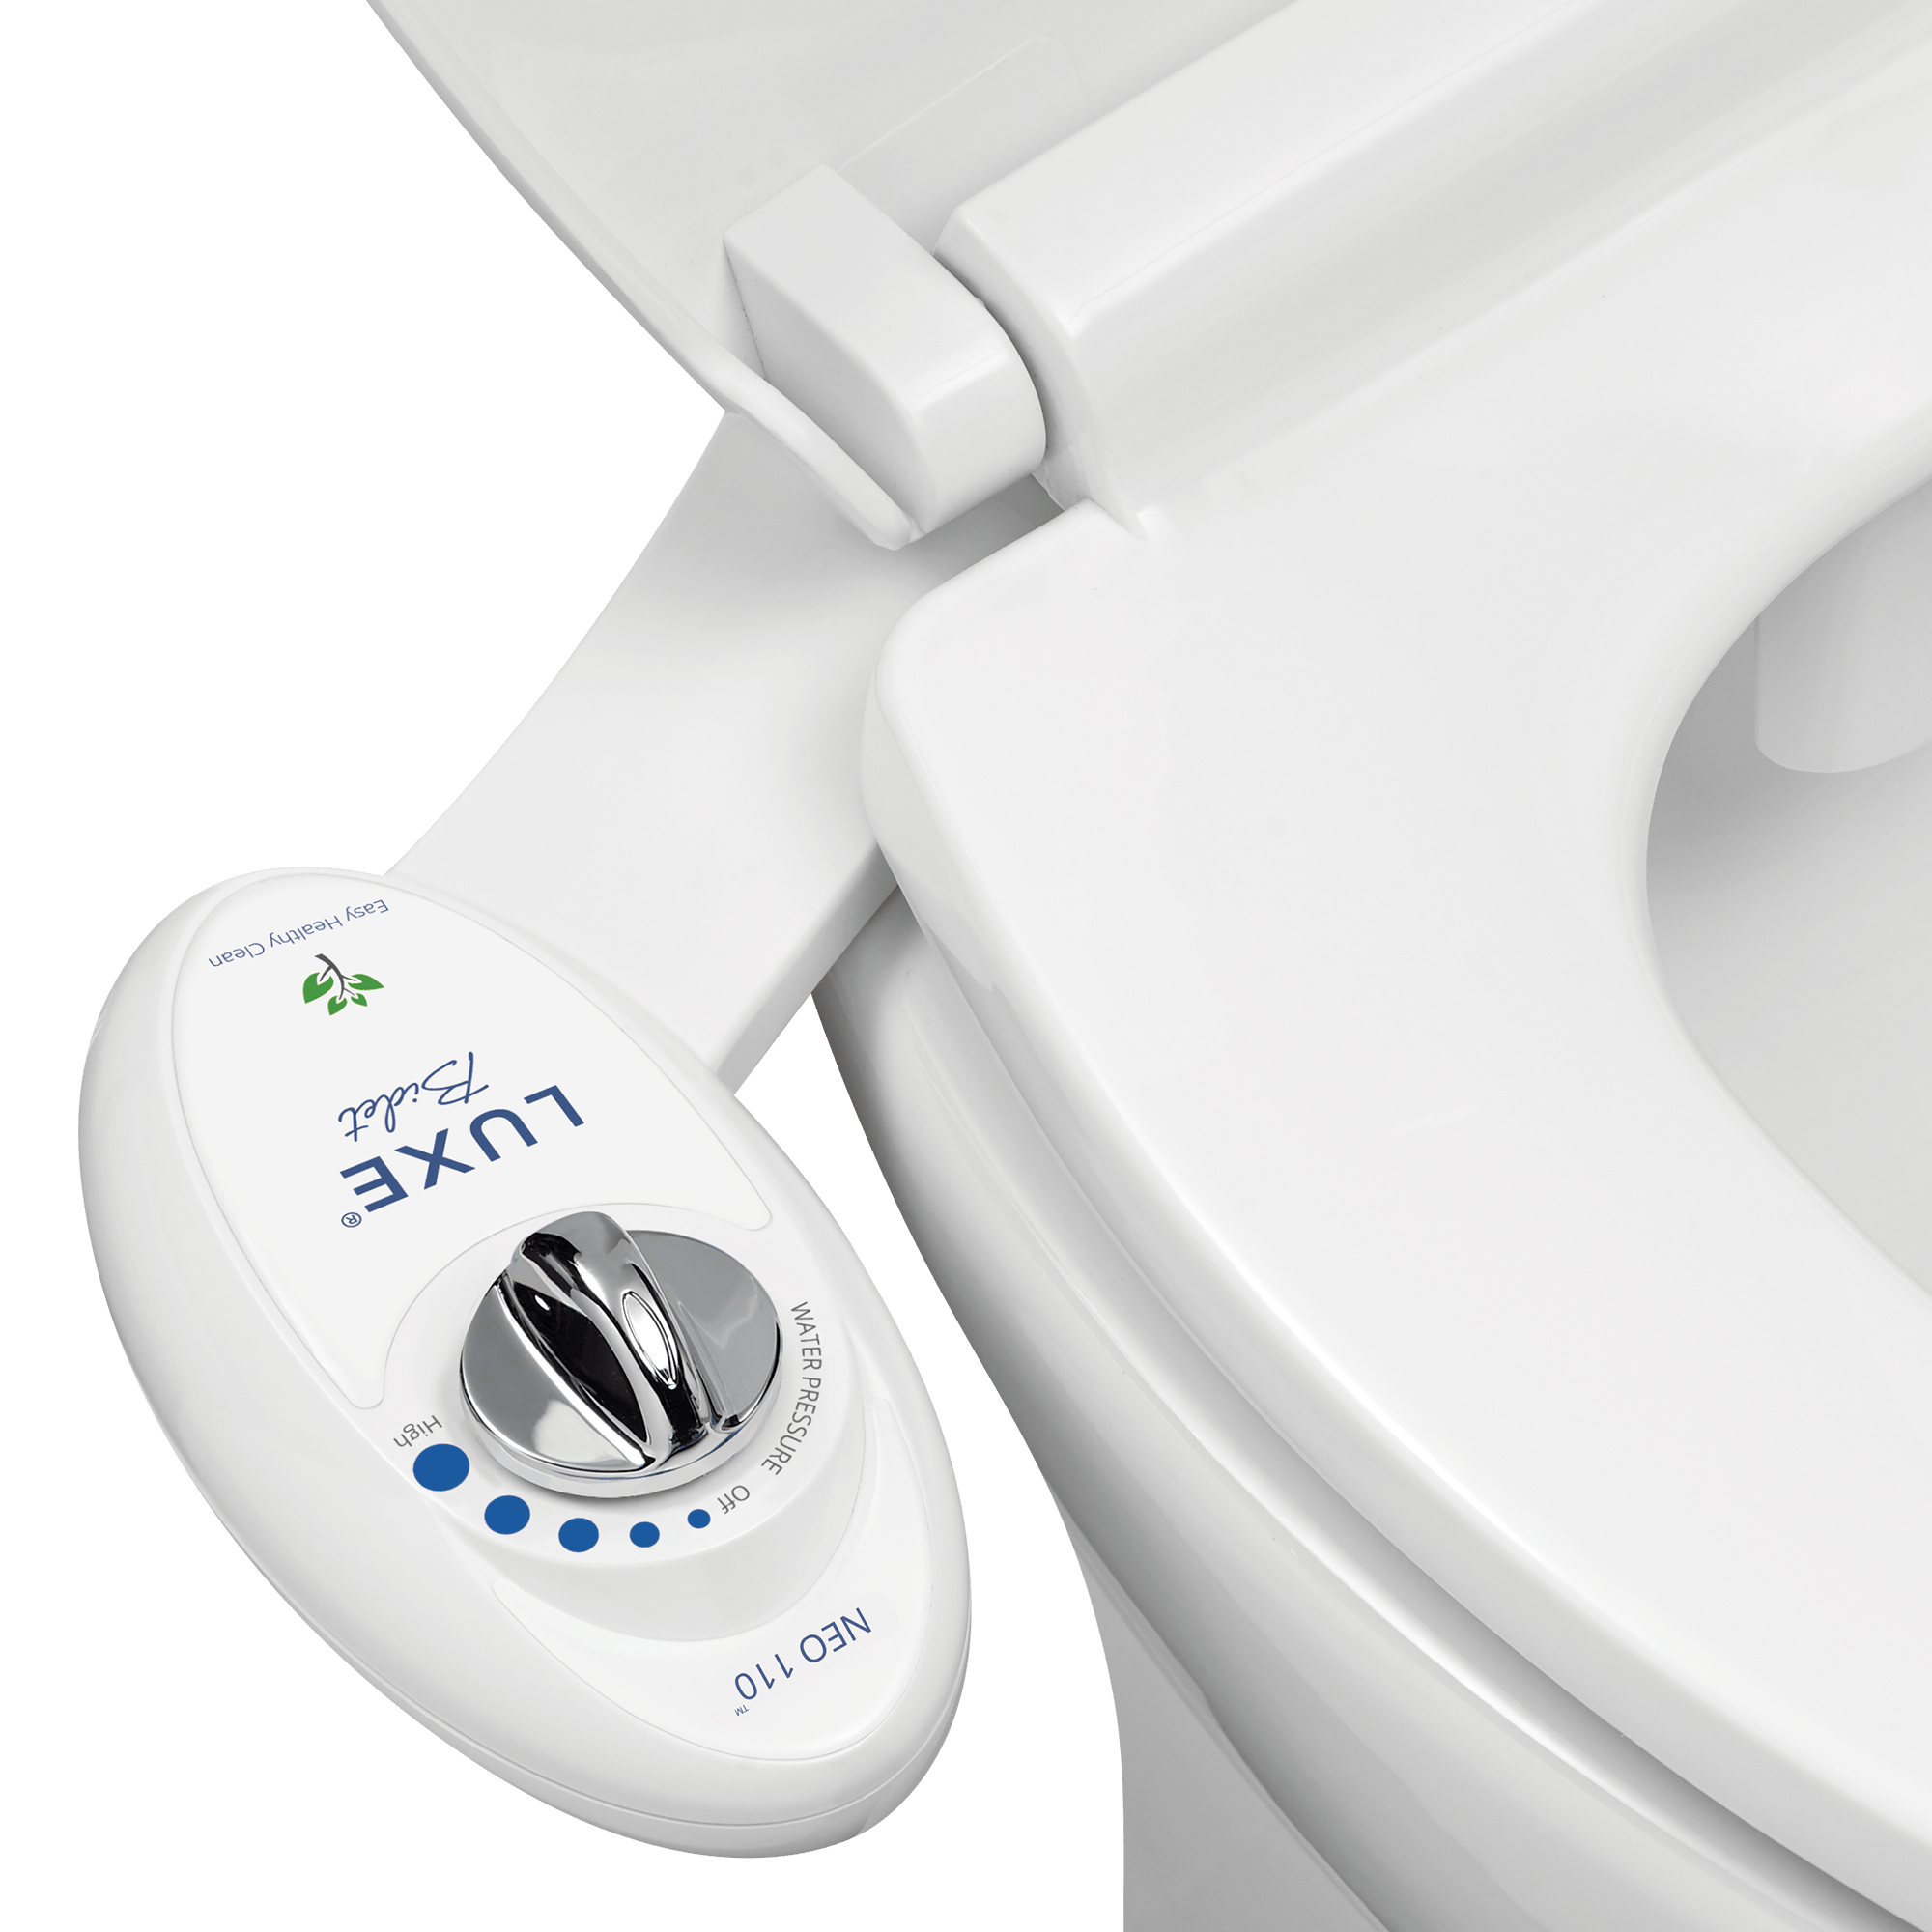 NEO 110: Imperfect Packaging - NEO 110 White installed on a toilet, open lid